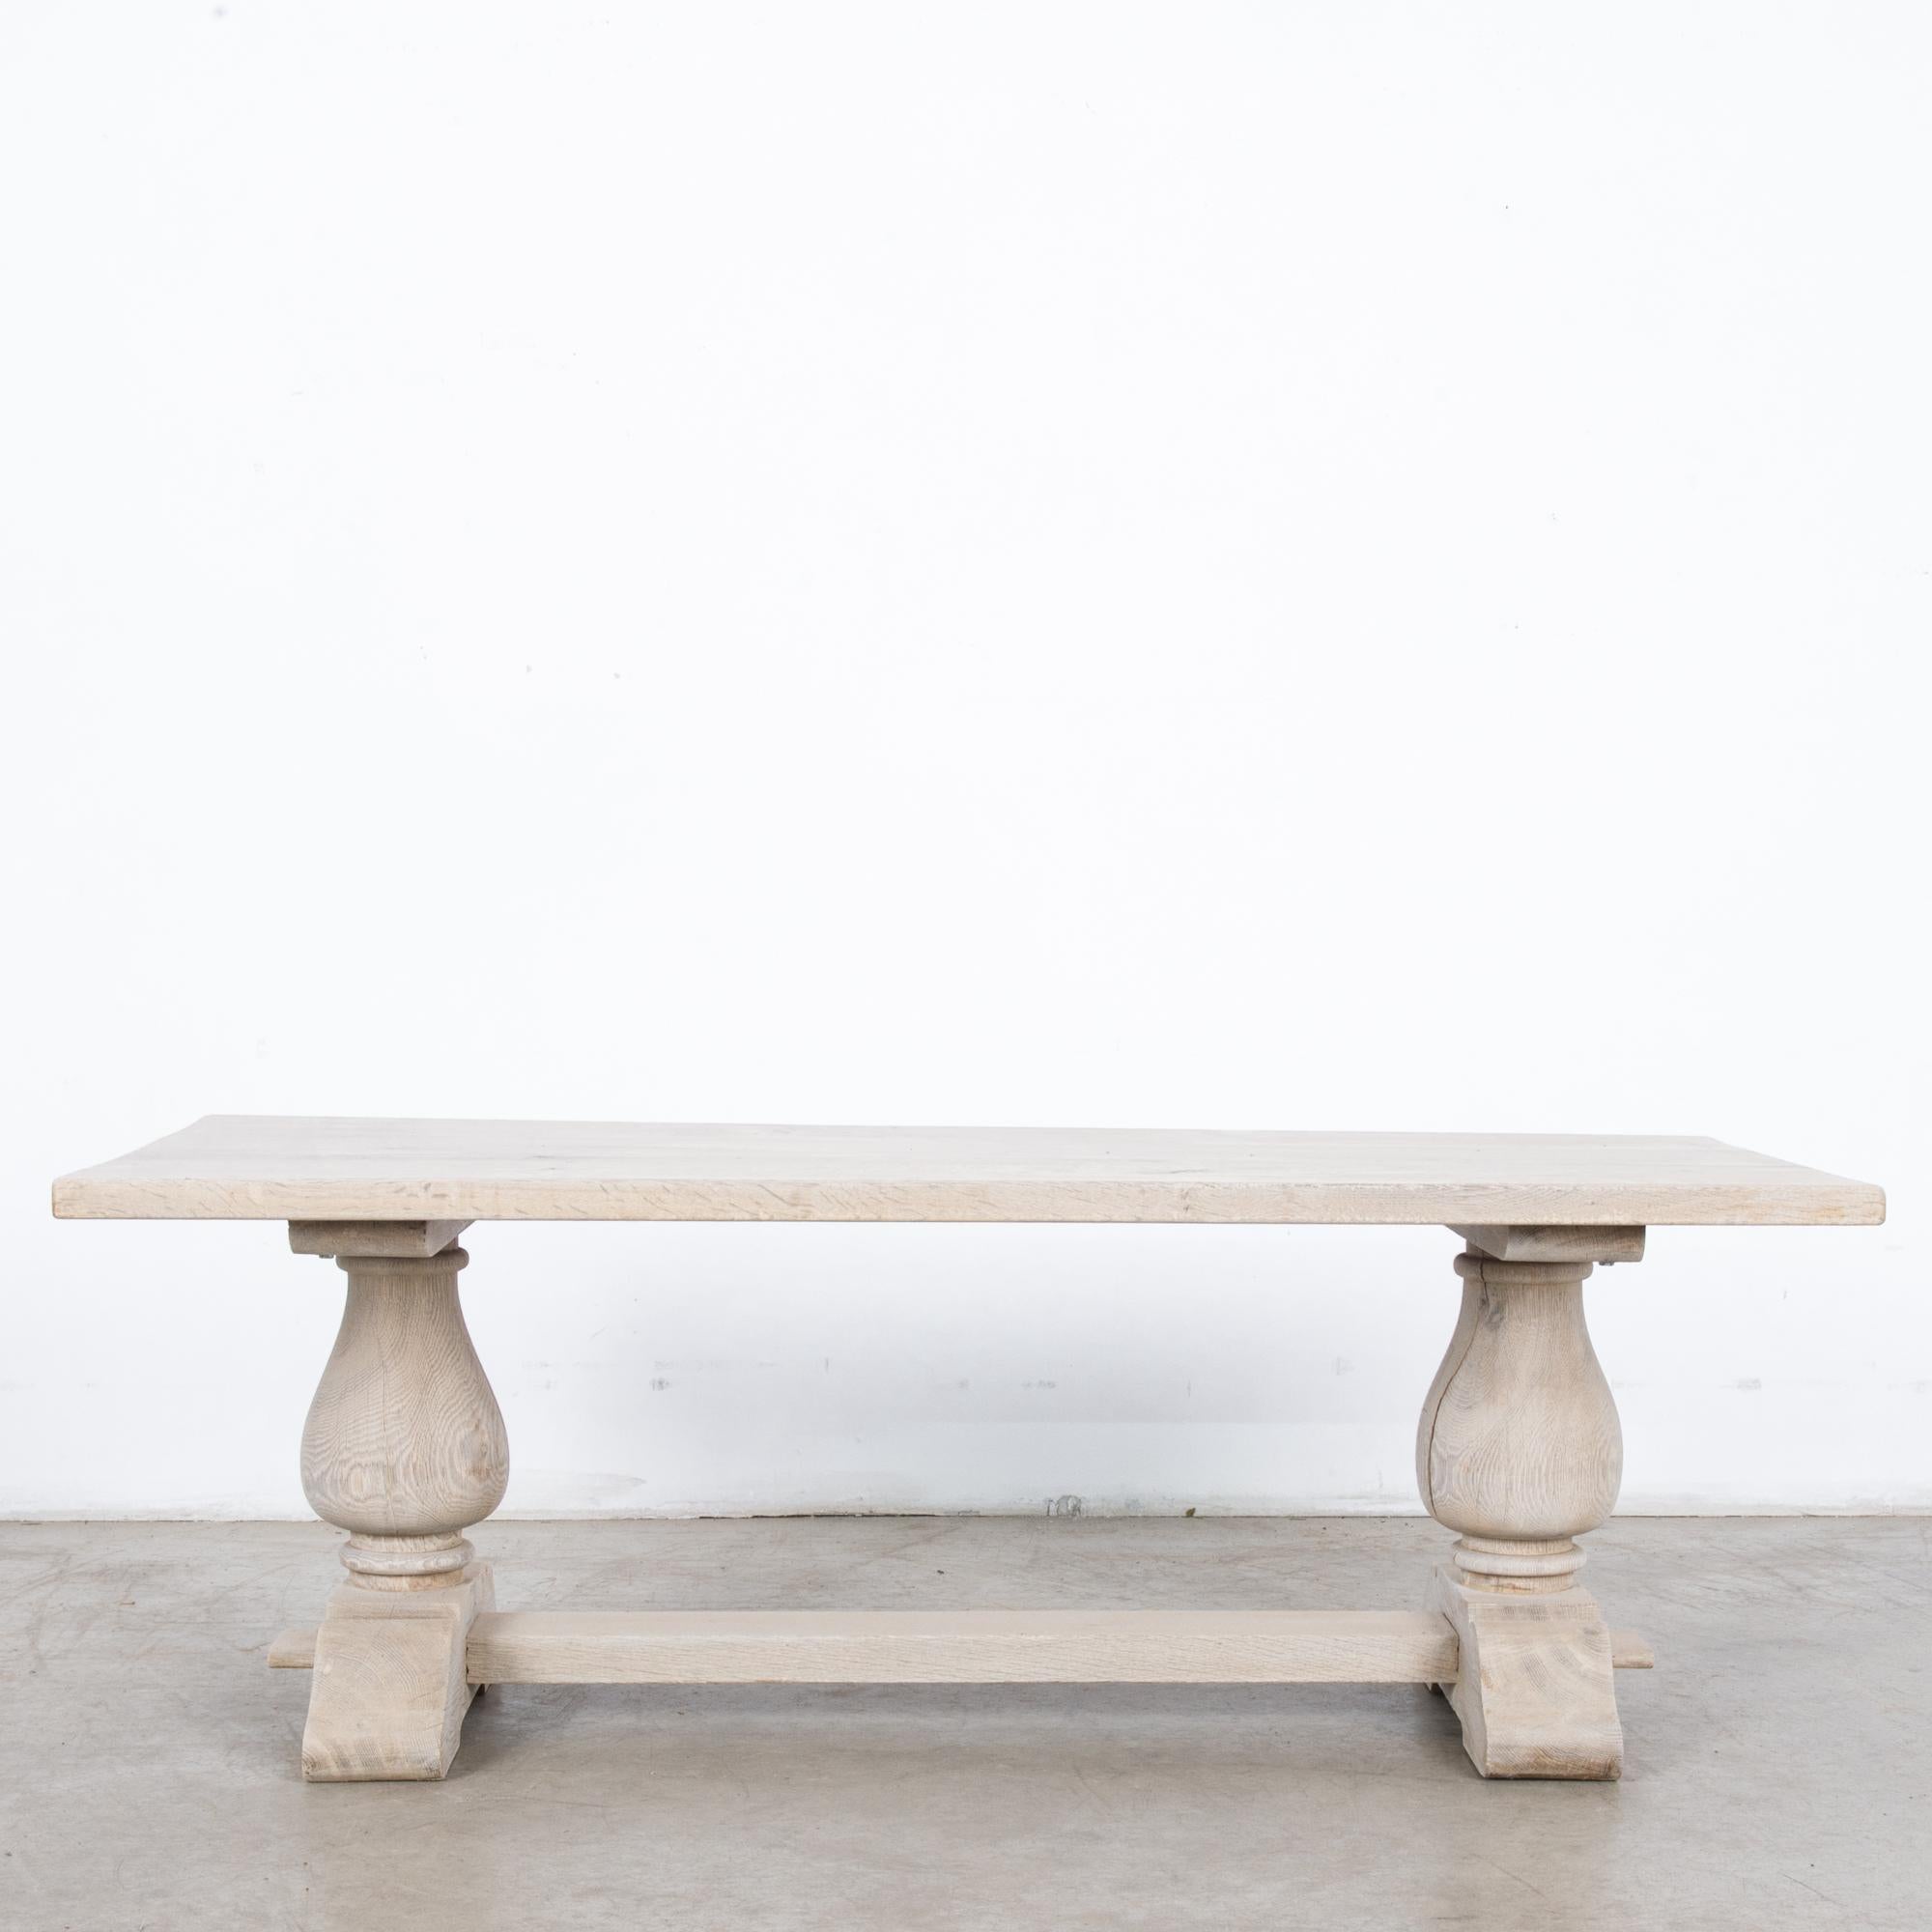 A bleached oak table from Belgium, circa 1950. The smooth rectangular tabletop sits upon a pair of trestle legs, which bloom into broad tulip shapes. A strut joins the brackets of the feet — broad and sturdy, with an elegant profile. The oak has